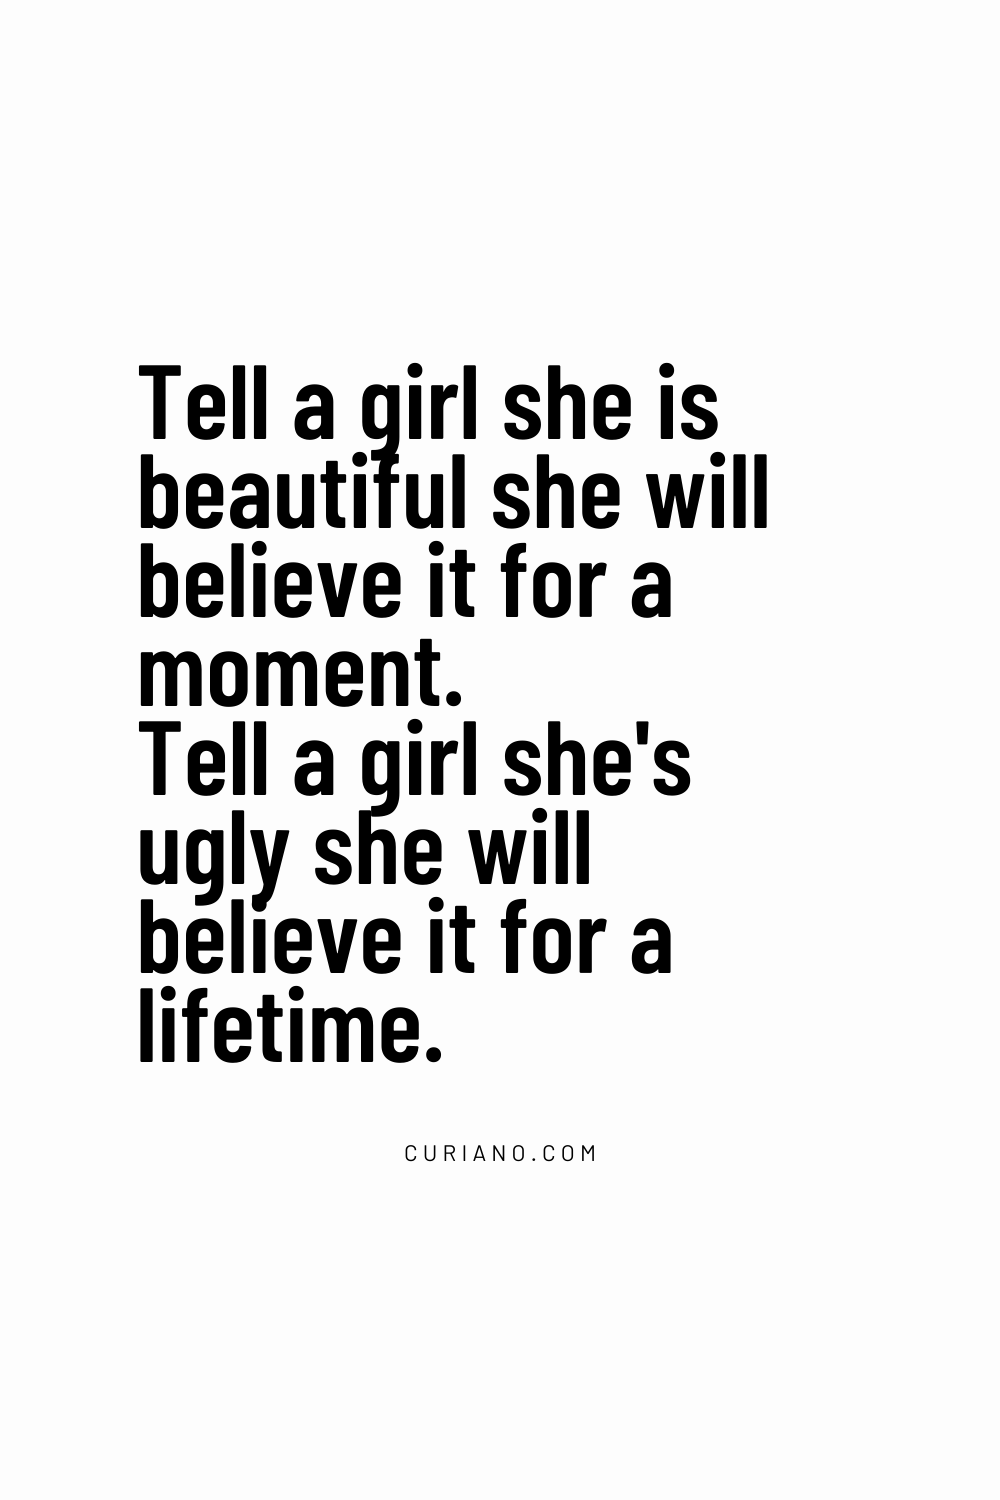 Tell a girl she is beautiful – she will believe it for a moment. Tell a girl she's ugly – she will believe it for a lifetime.